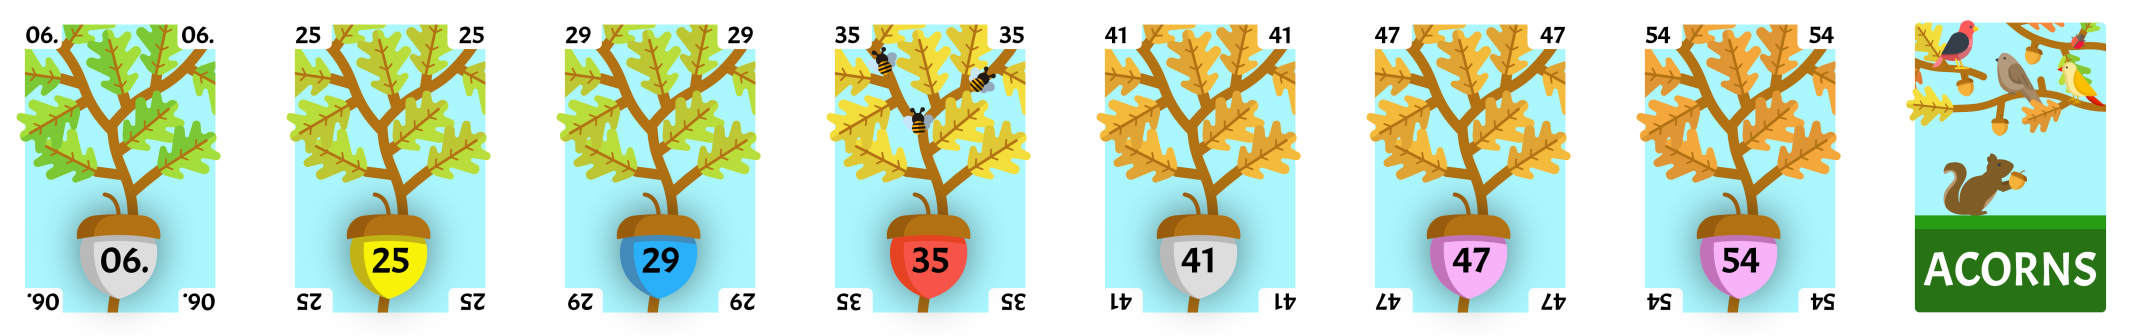 54 swapping positions with left-most card.